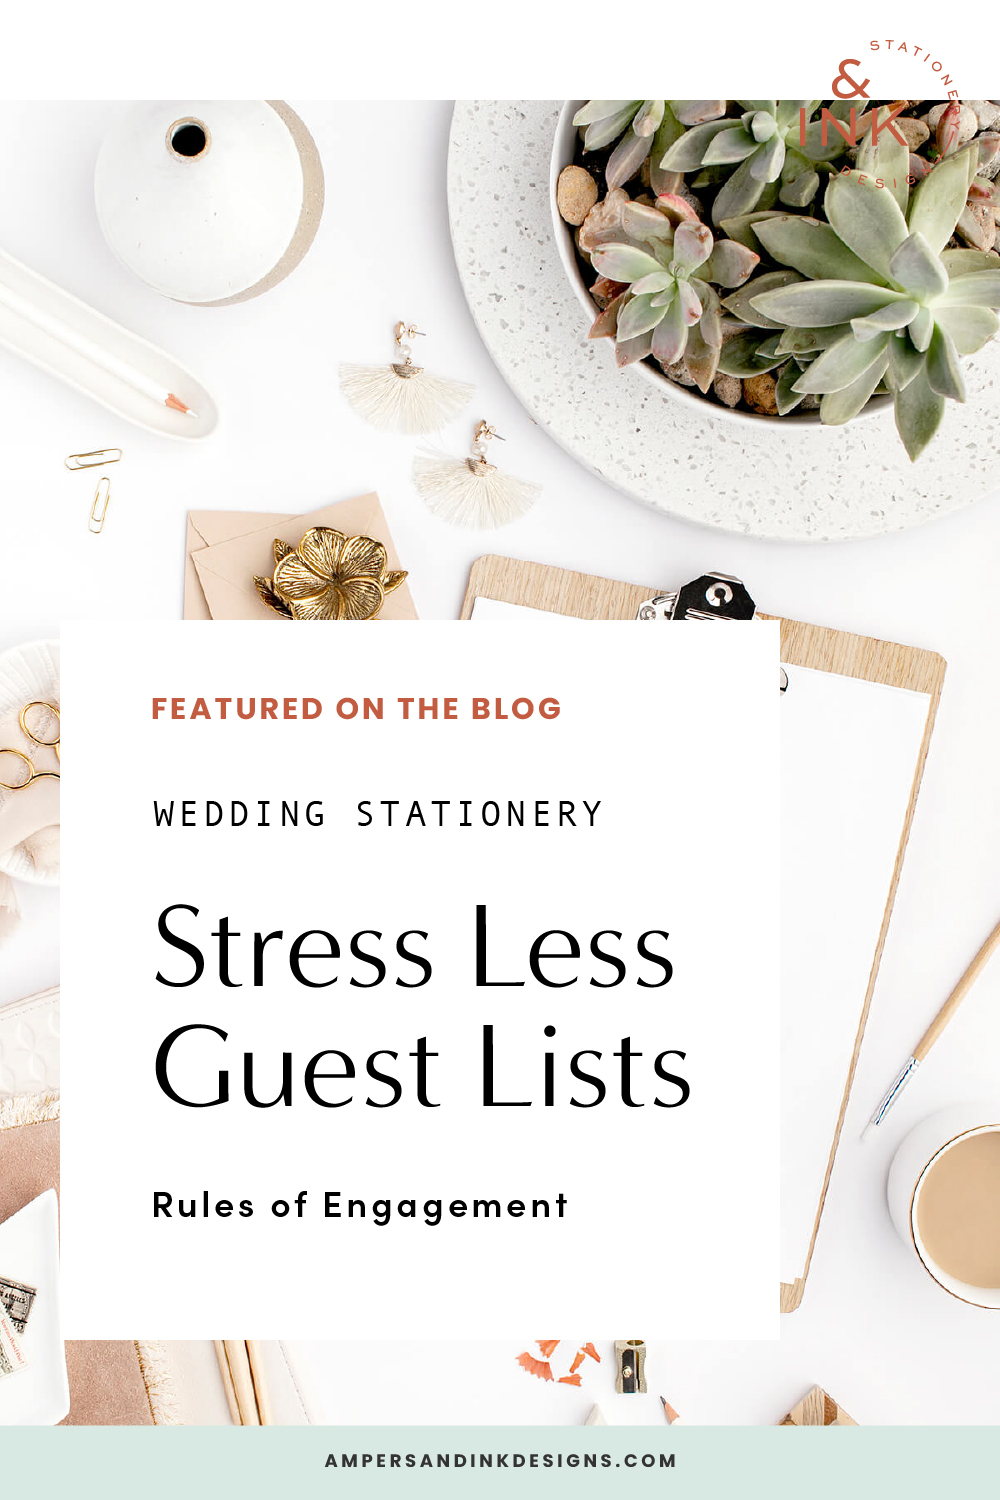 Stress Less Wedding Guest Lists - Rules of Engagement